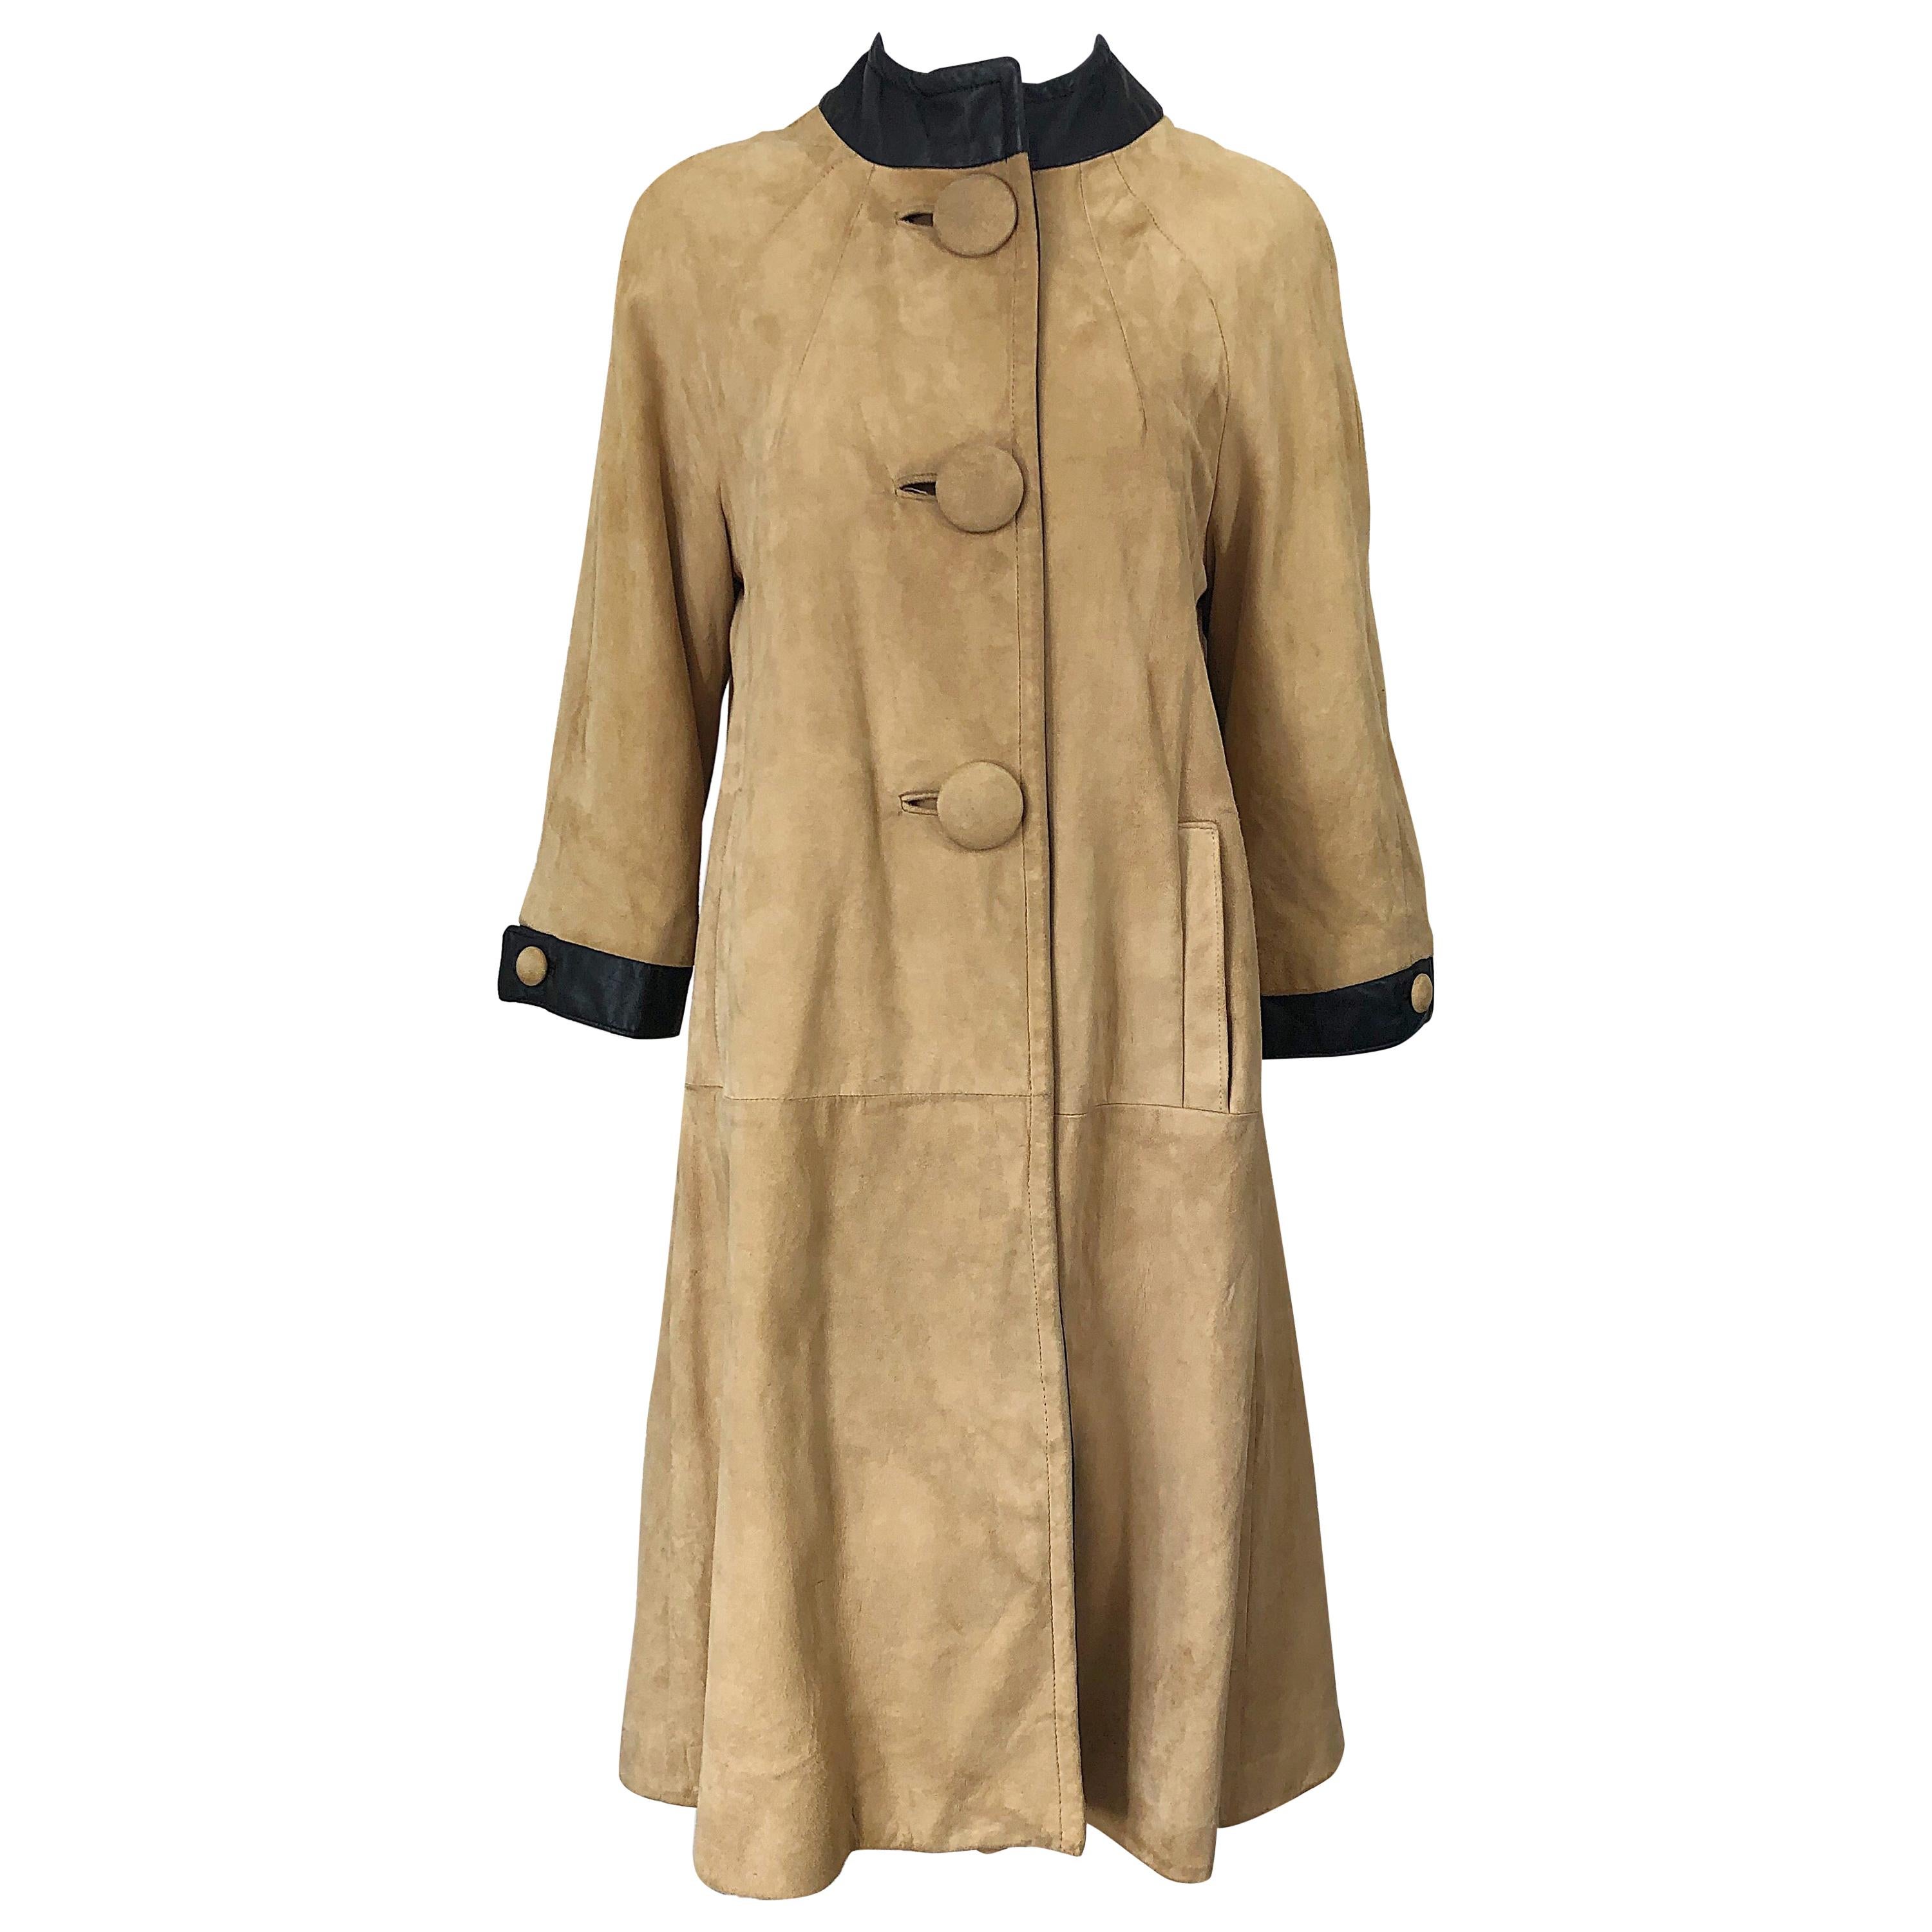 1960s Lillie Rubin Tan + Black Suede and Leather Vintage 60s Swing Jacket Coat